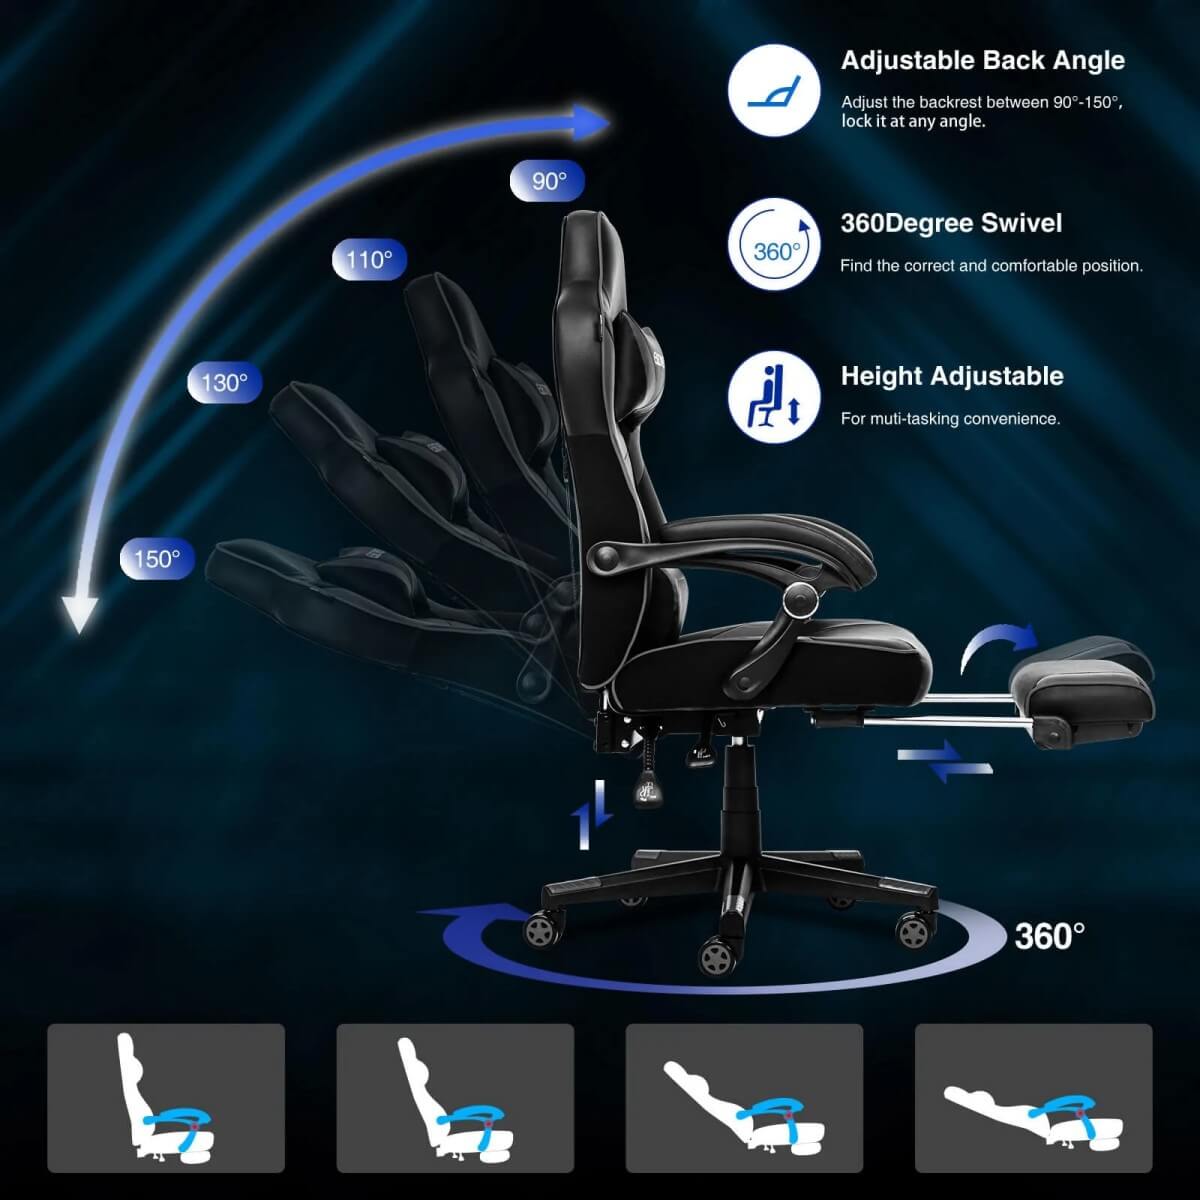 Elecwish Video Game Chairs Grey Gaming Chair With Footrest OC087 can adjustback angle, height and have 360 degree swivel